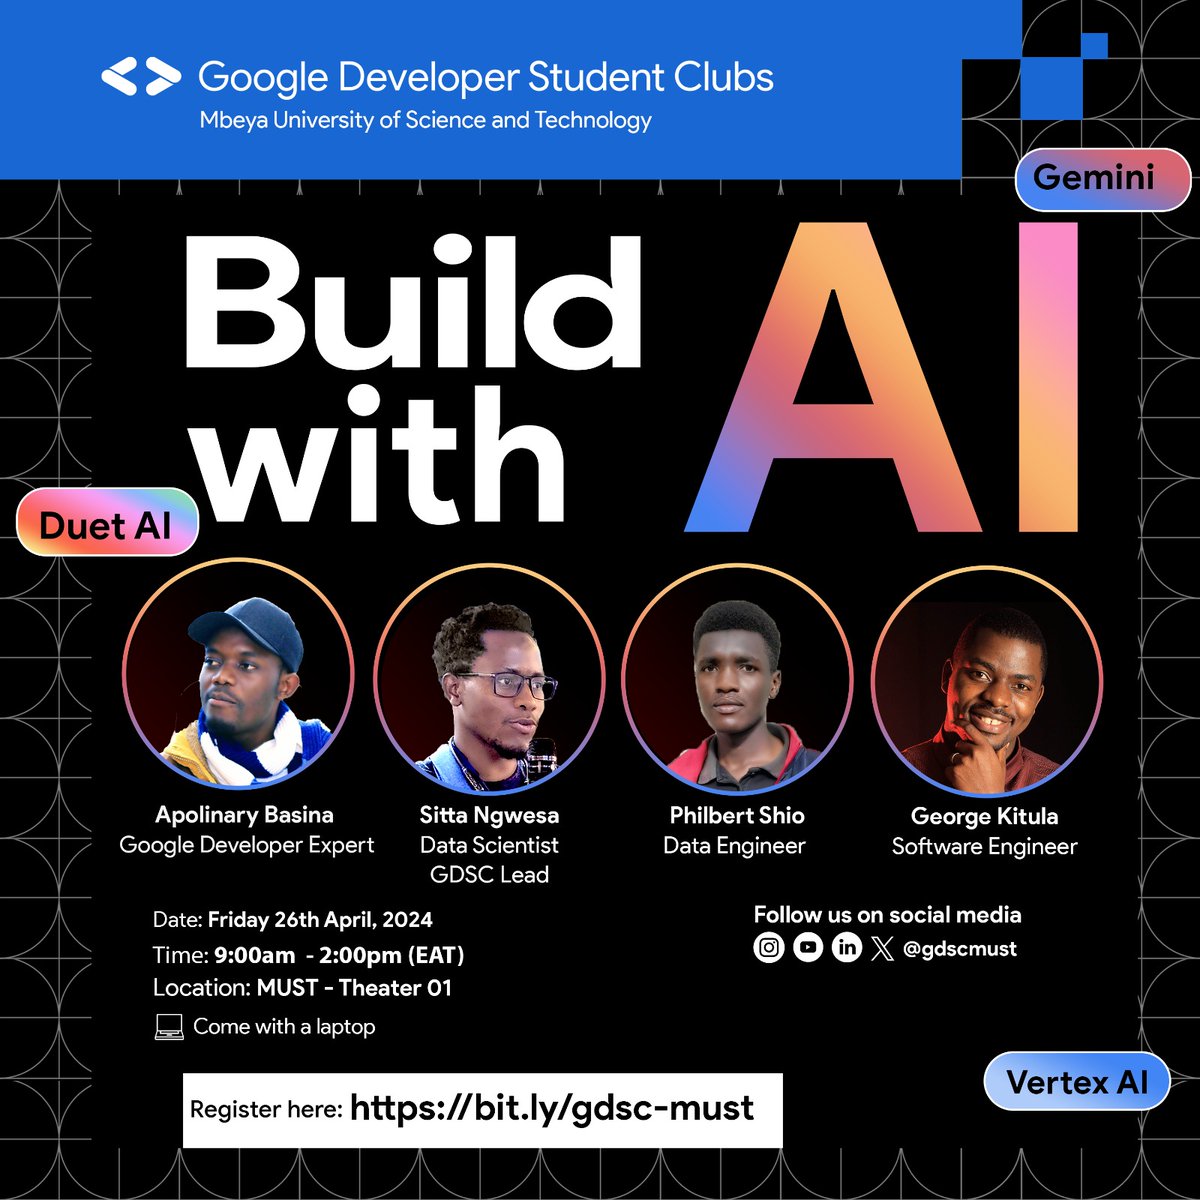 Join us at Build with AI in the exciting world of Artificial Intelligence! It also offers networking opportunities, sharing ideas, and collaboration on projects and experiments using Google’s latest AI/ML tools.   bit.ly/gdsc-must

#BuildwithAI #developerstudentclubs #gdsc